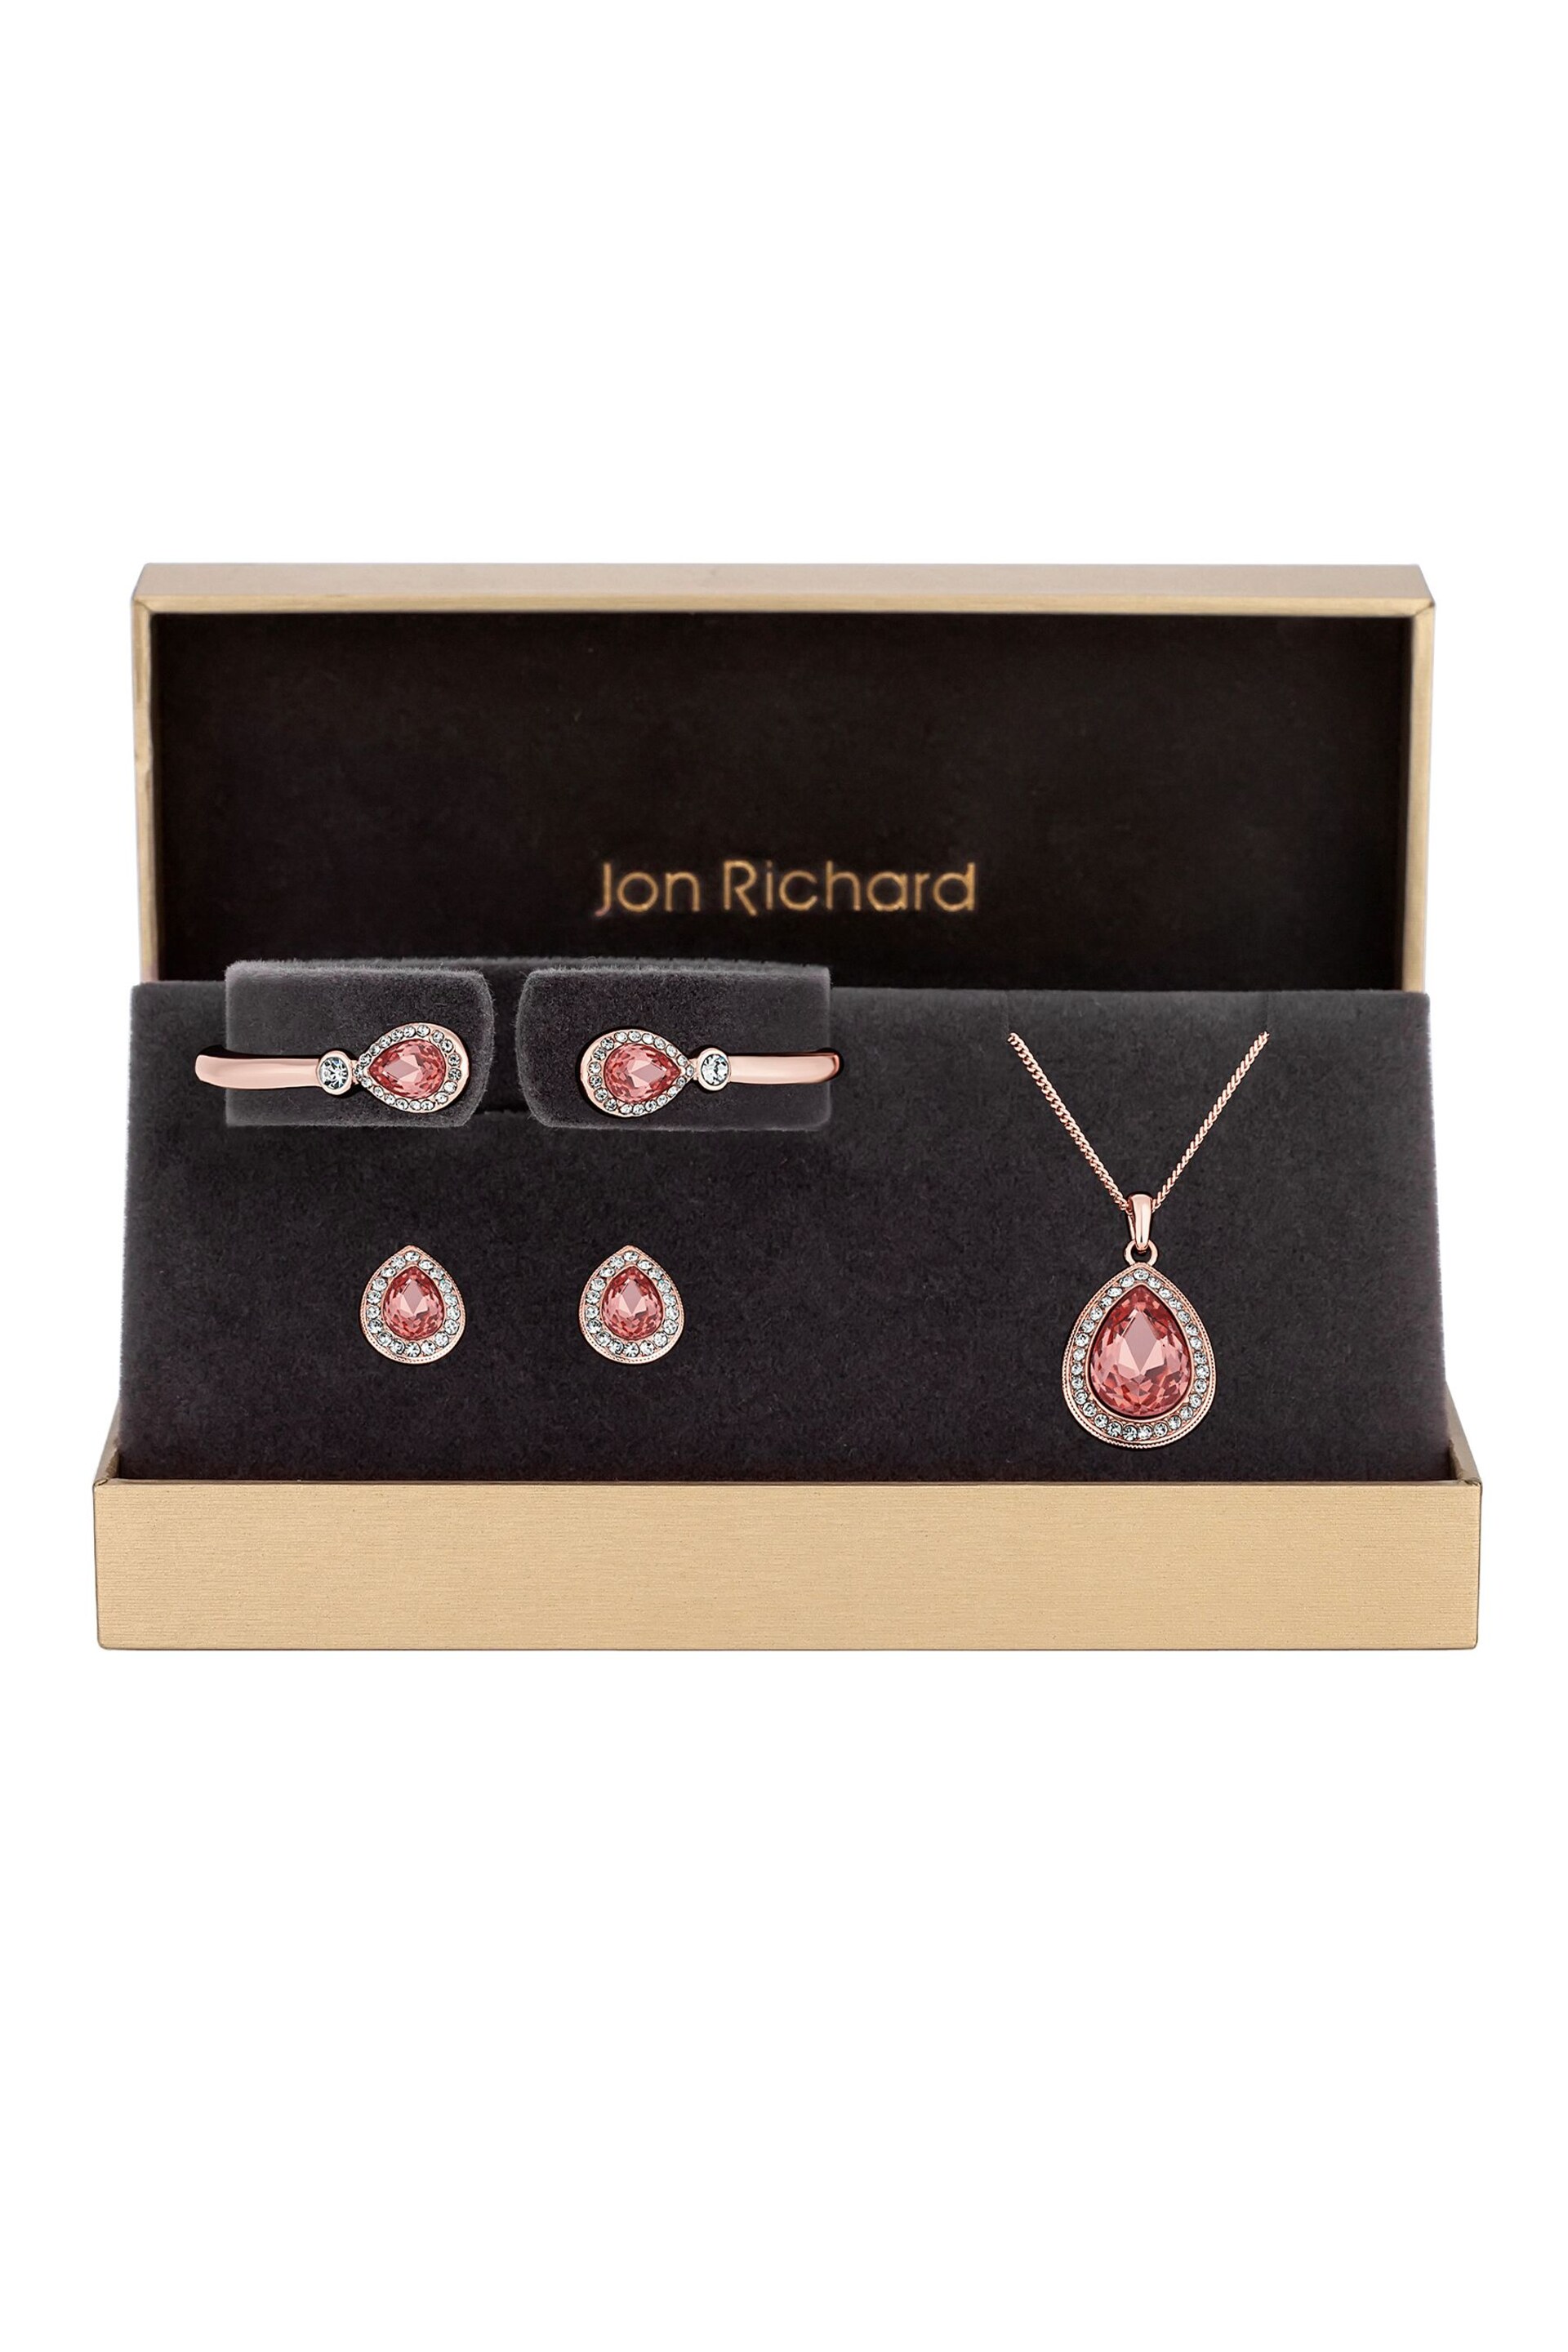 Jon Richard Rose Gold Plated With Pink Pear Crystals Trio Set - Gift Boxed - Image 1 of 3